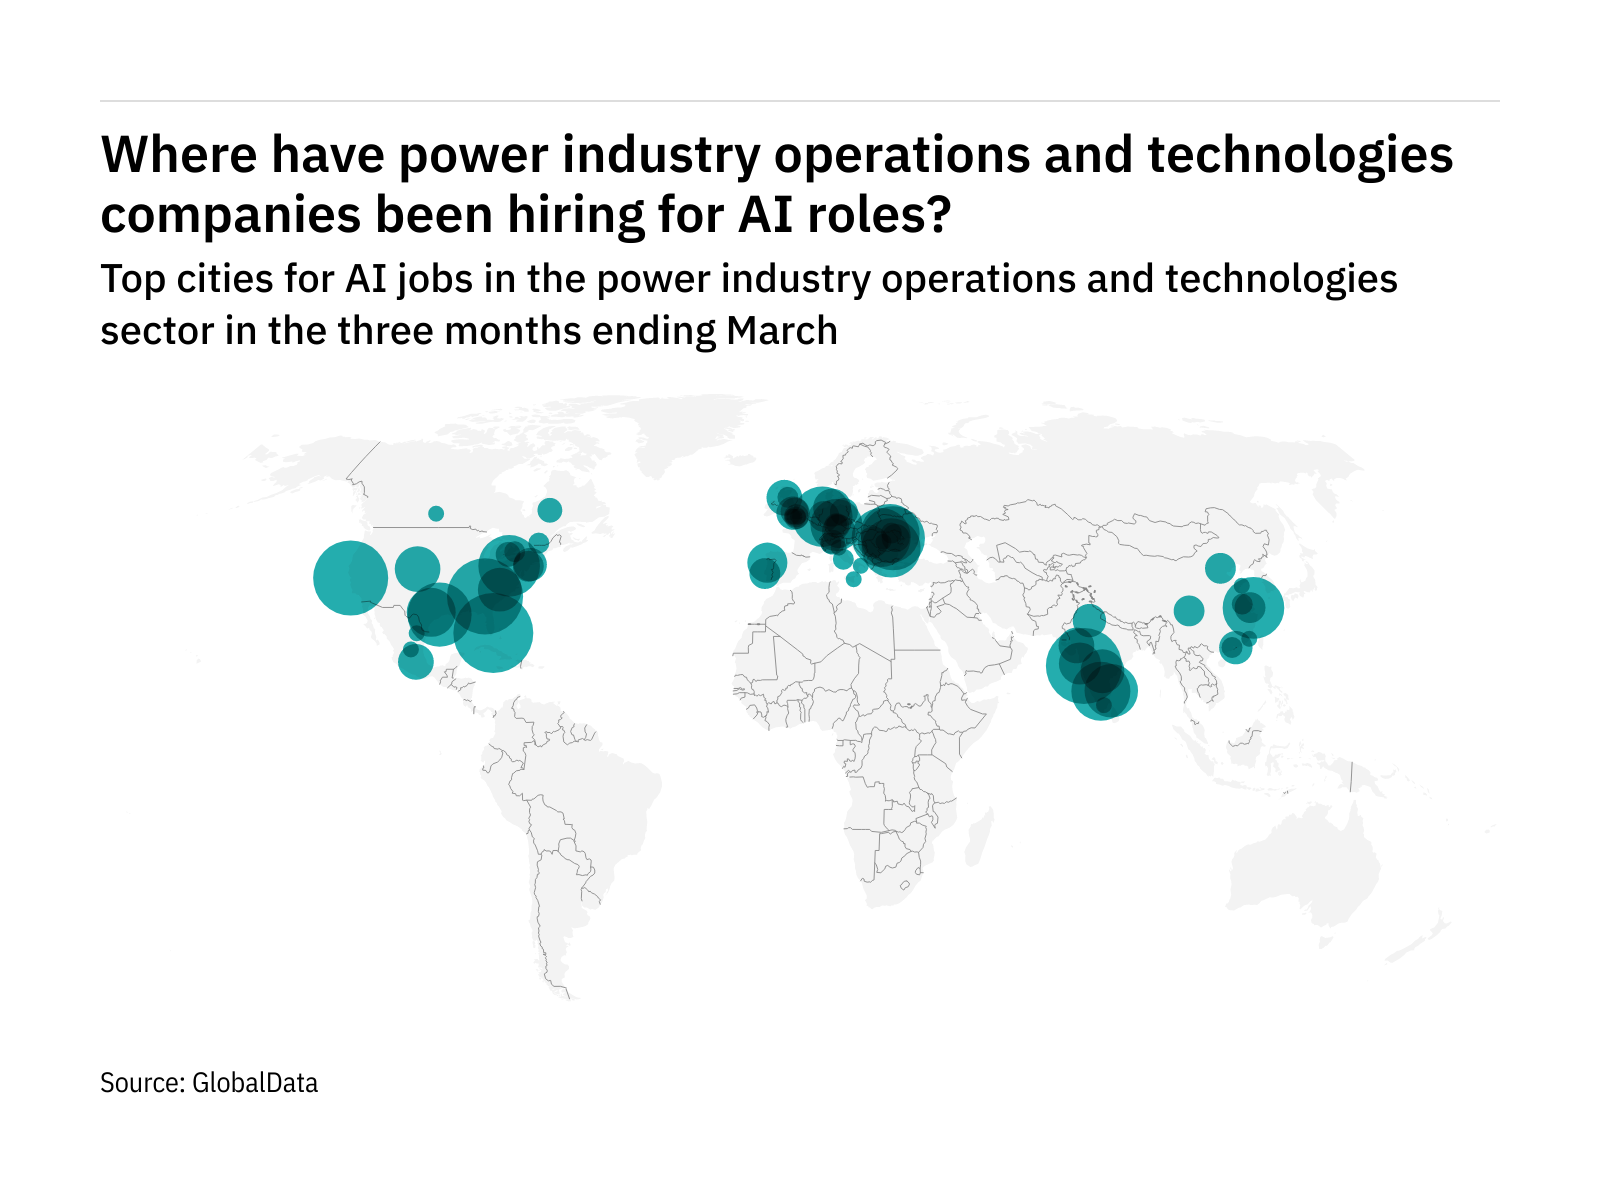 North America is seeing a hiring boom in power industry AI roles